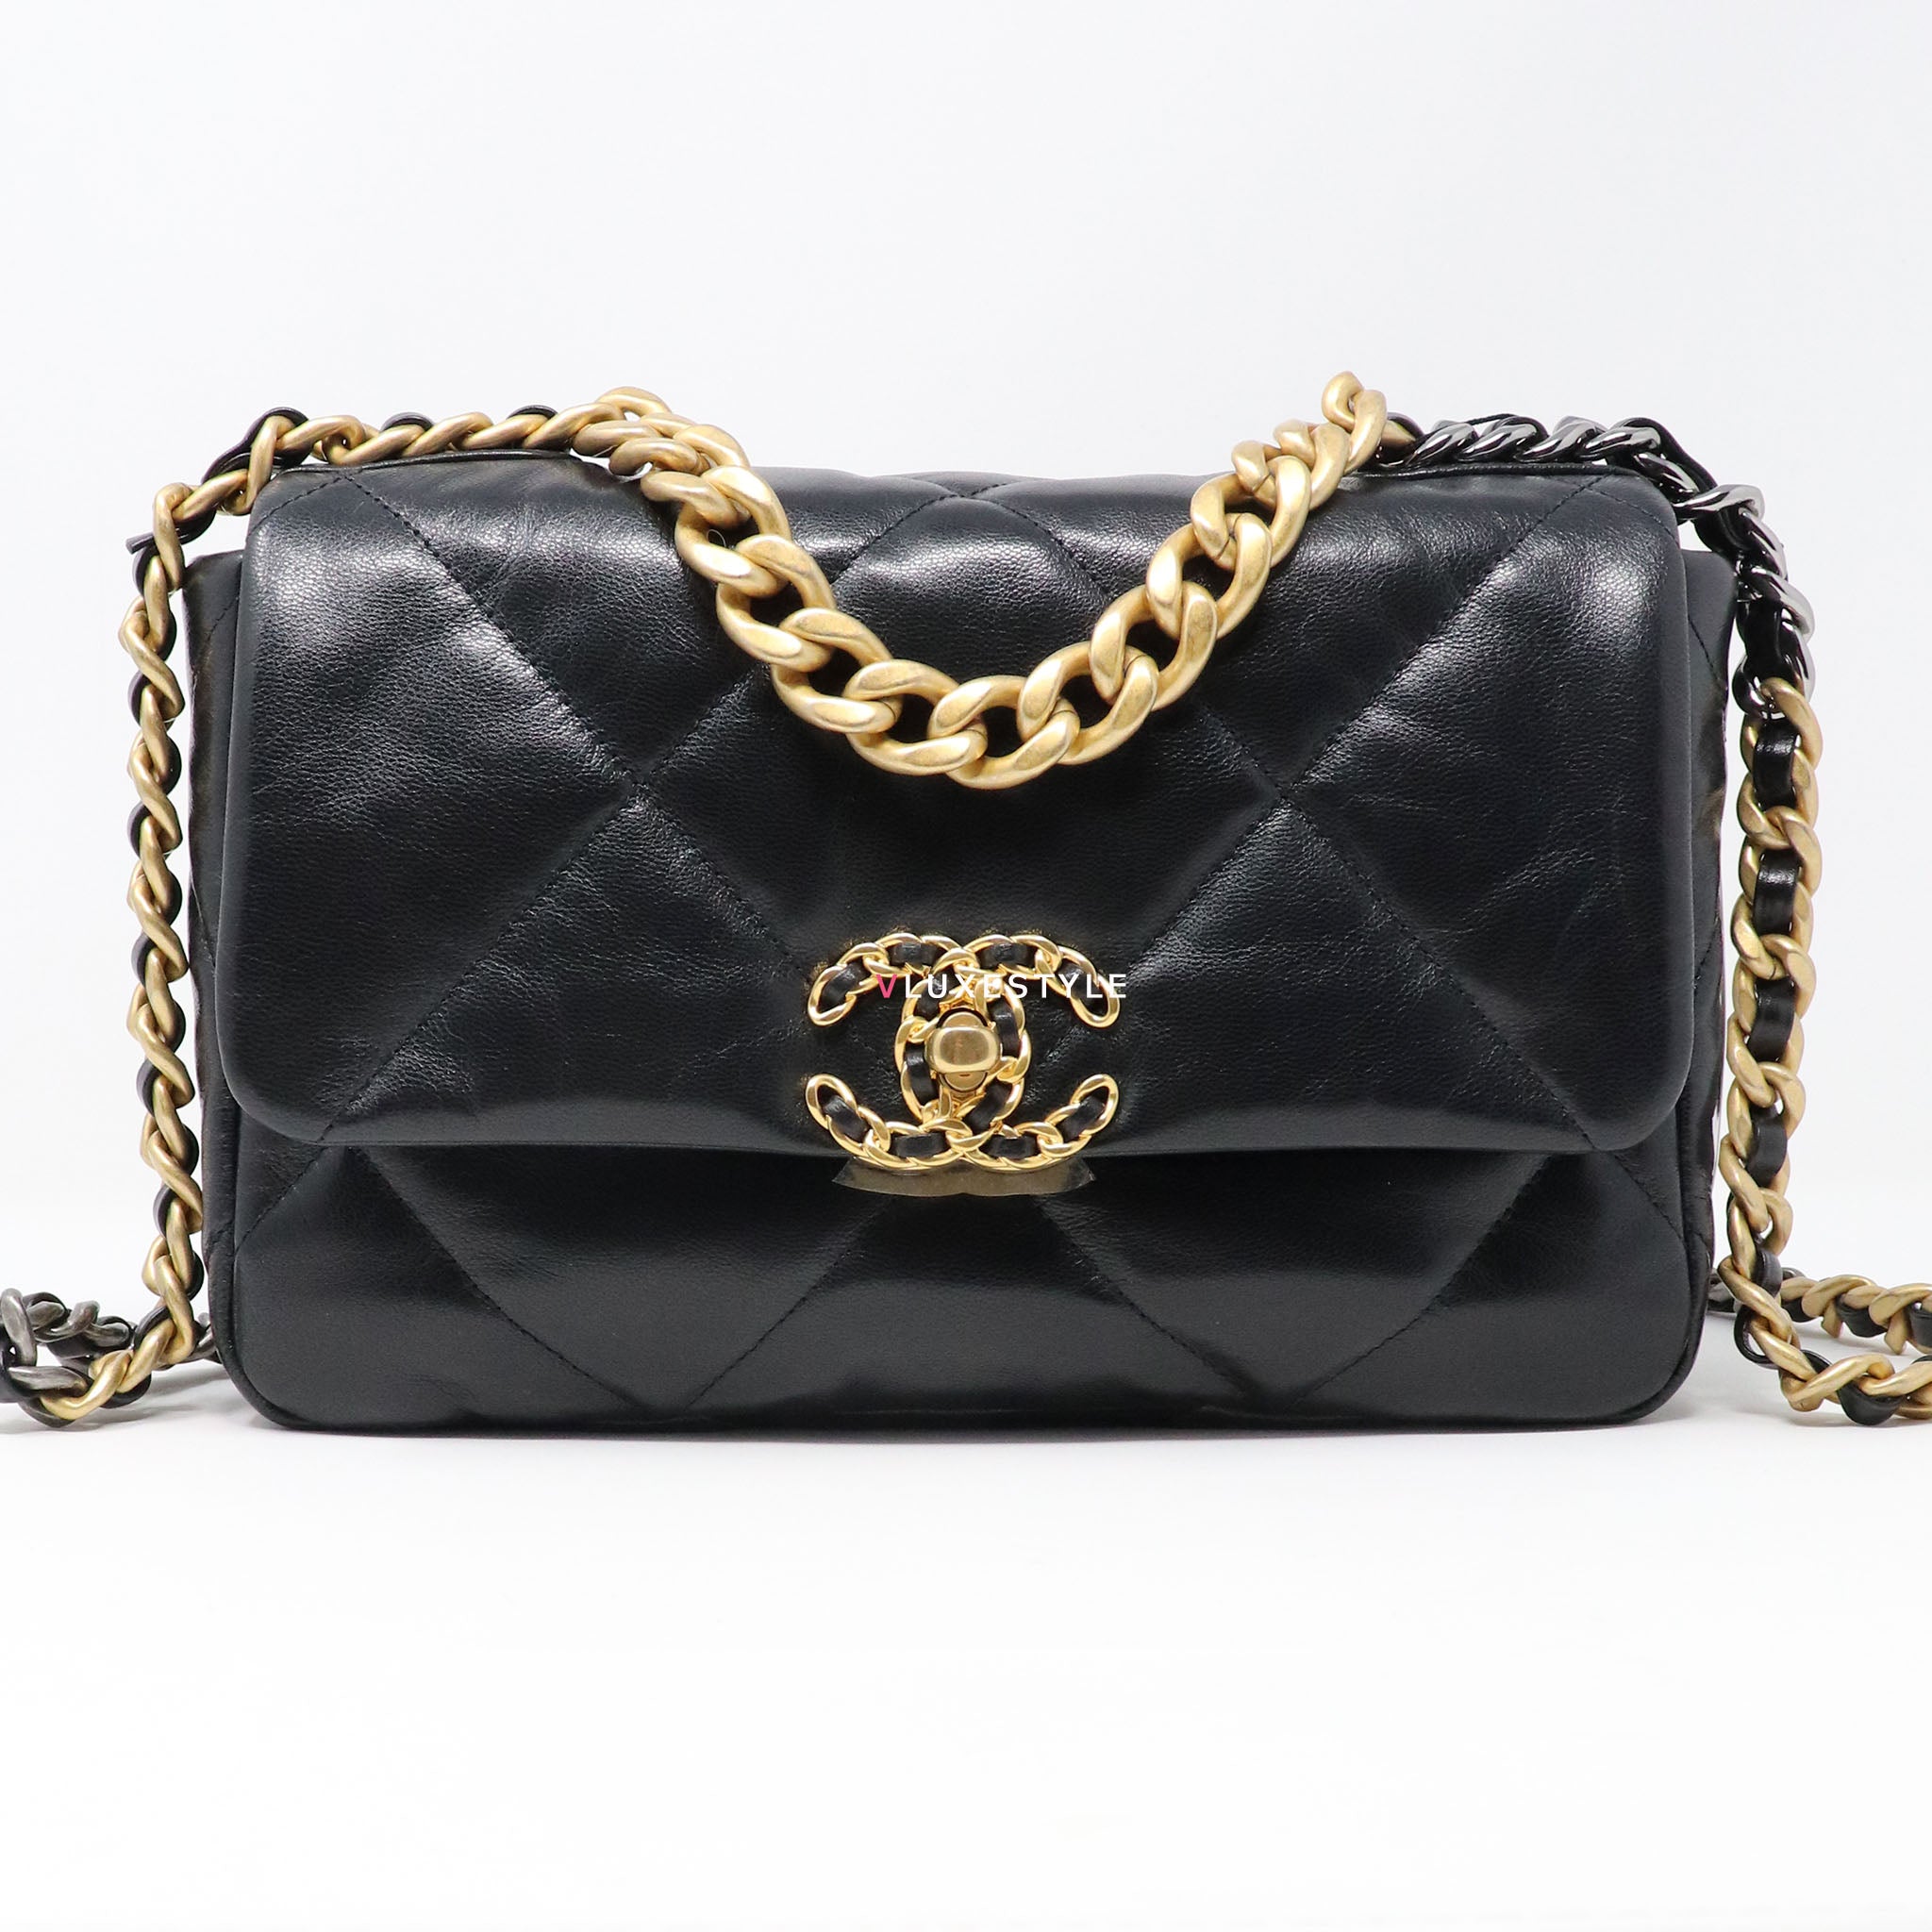 Chanel 19 Small Black Goatskin Mixed Hardware – Coco Approved Studio